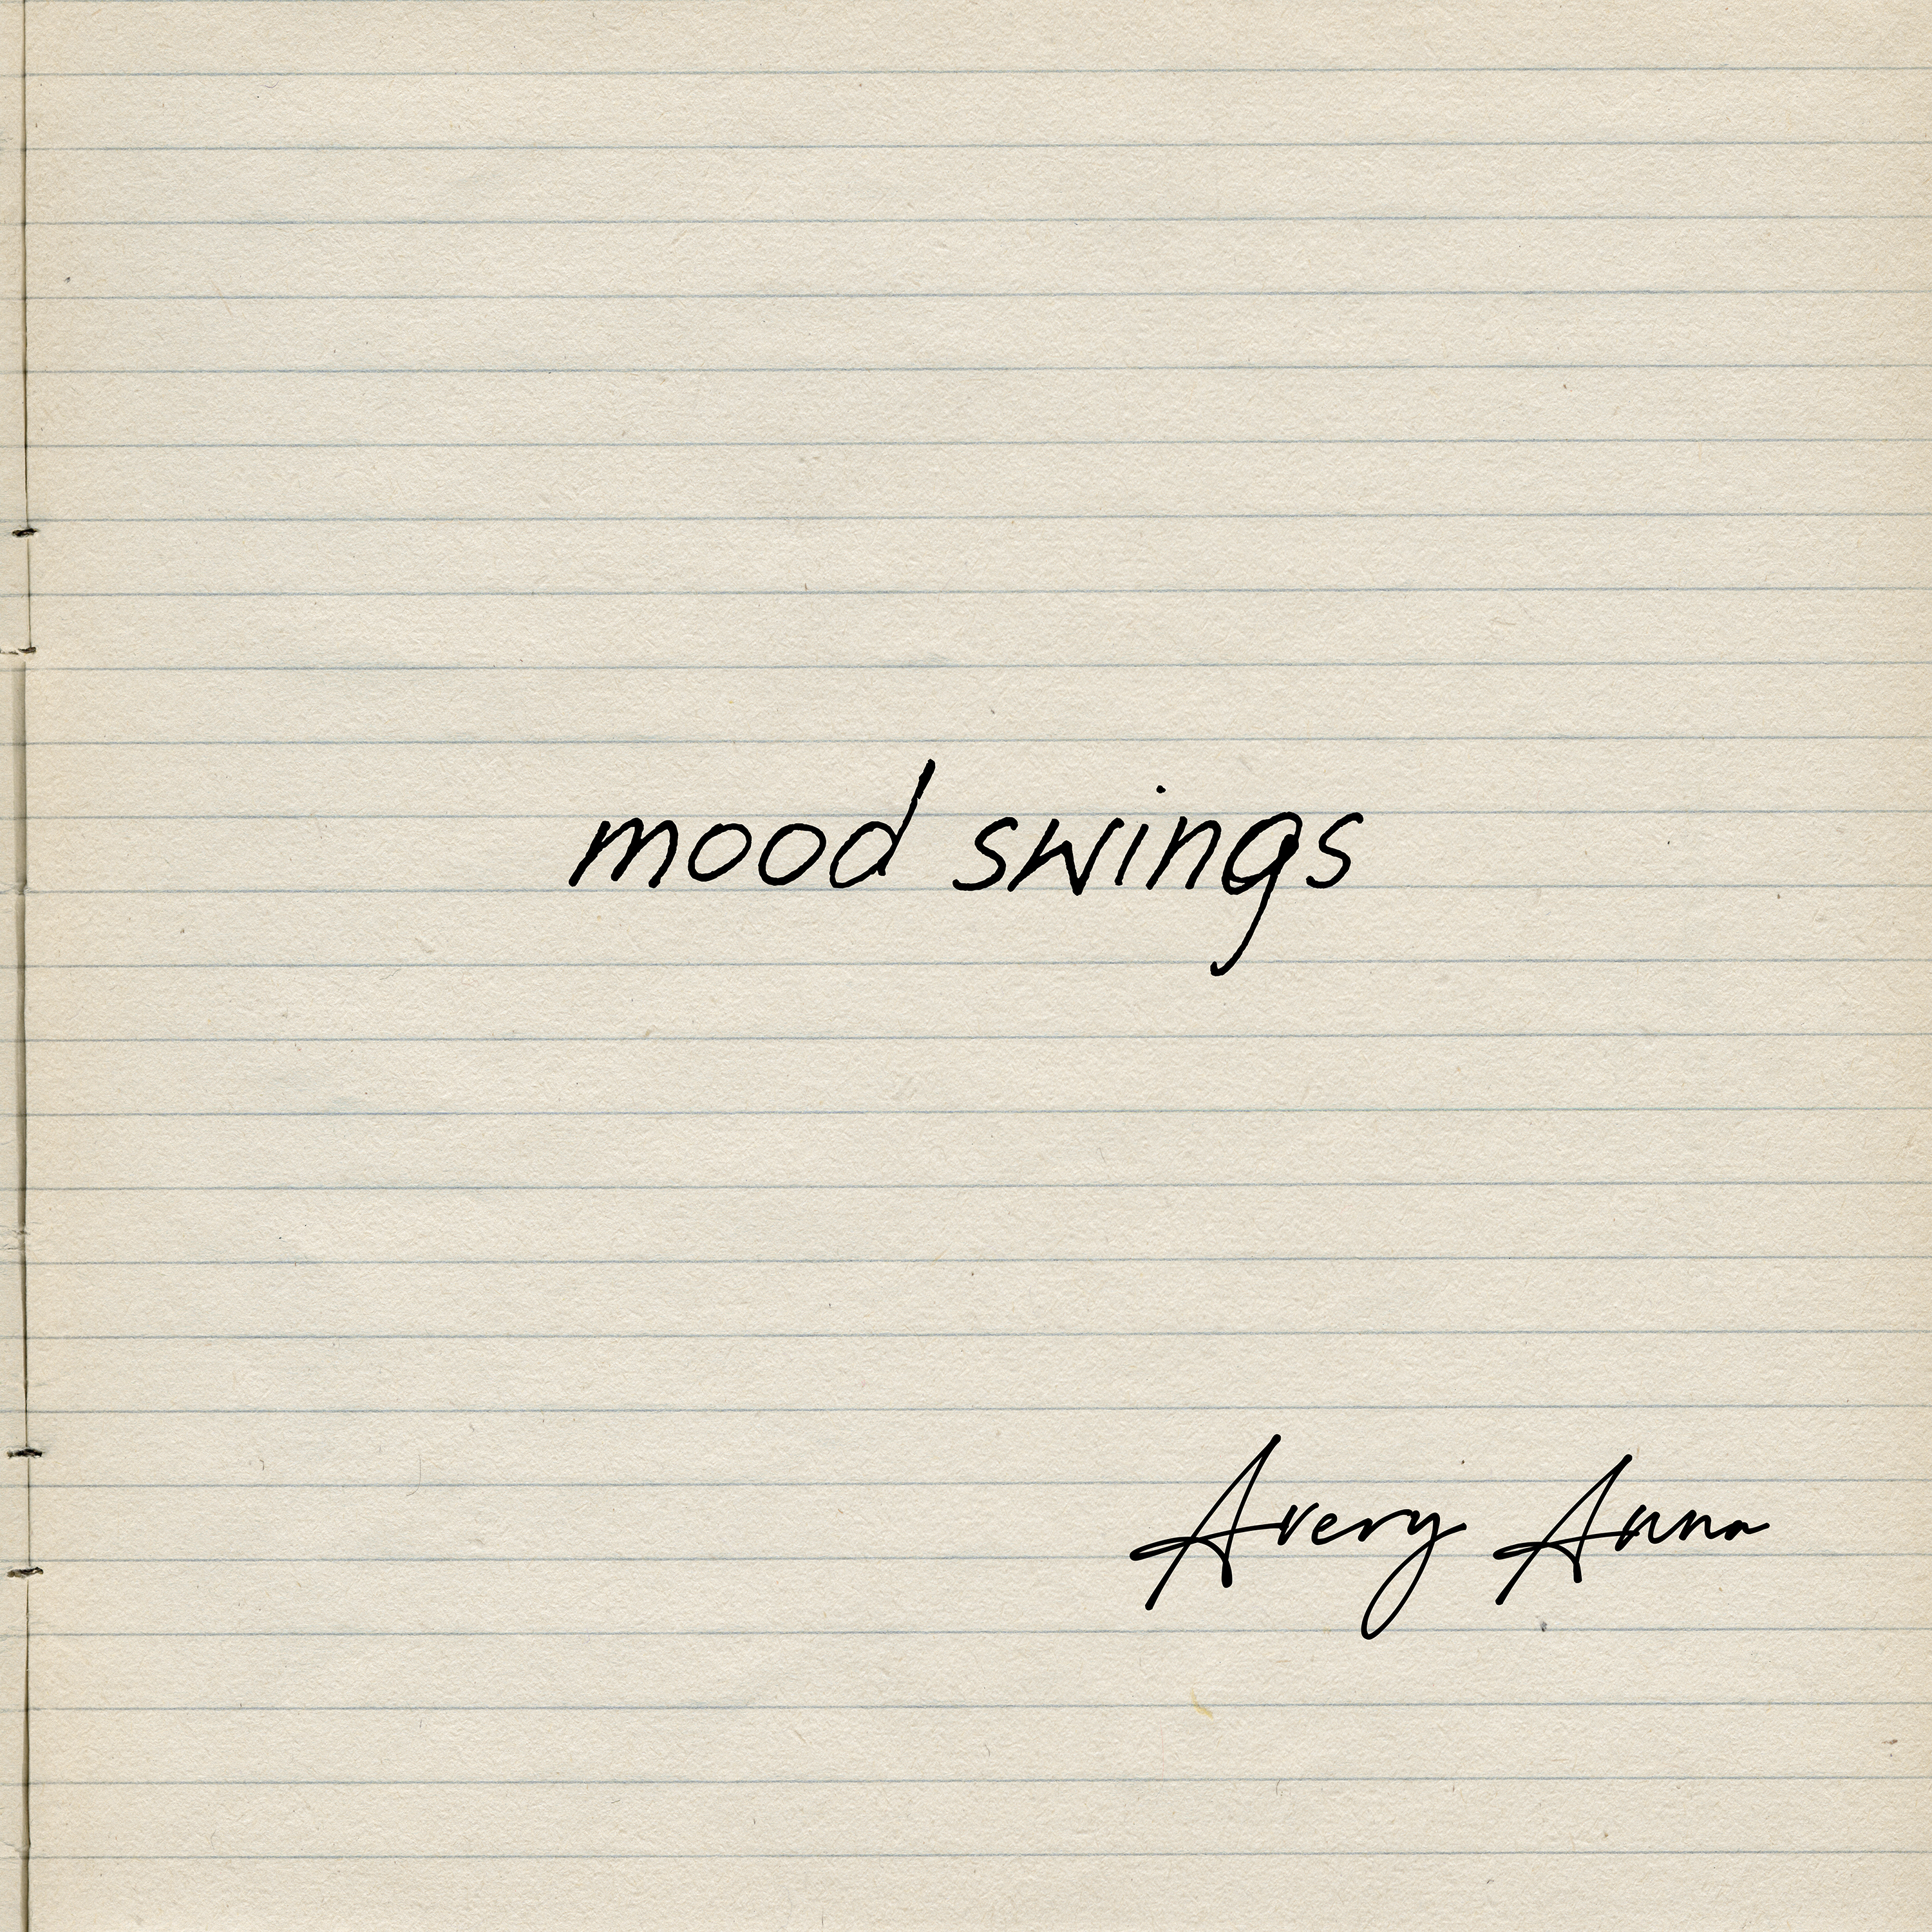 “NARCISSIST” SINGER / SONGWRITER AVERY ANNA ANNOUNCES DEBUT EP MOOD SWINGS, DUE OCTOBER 7